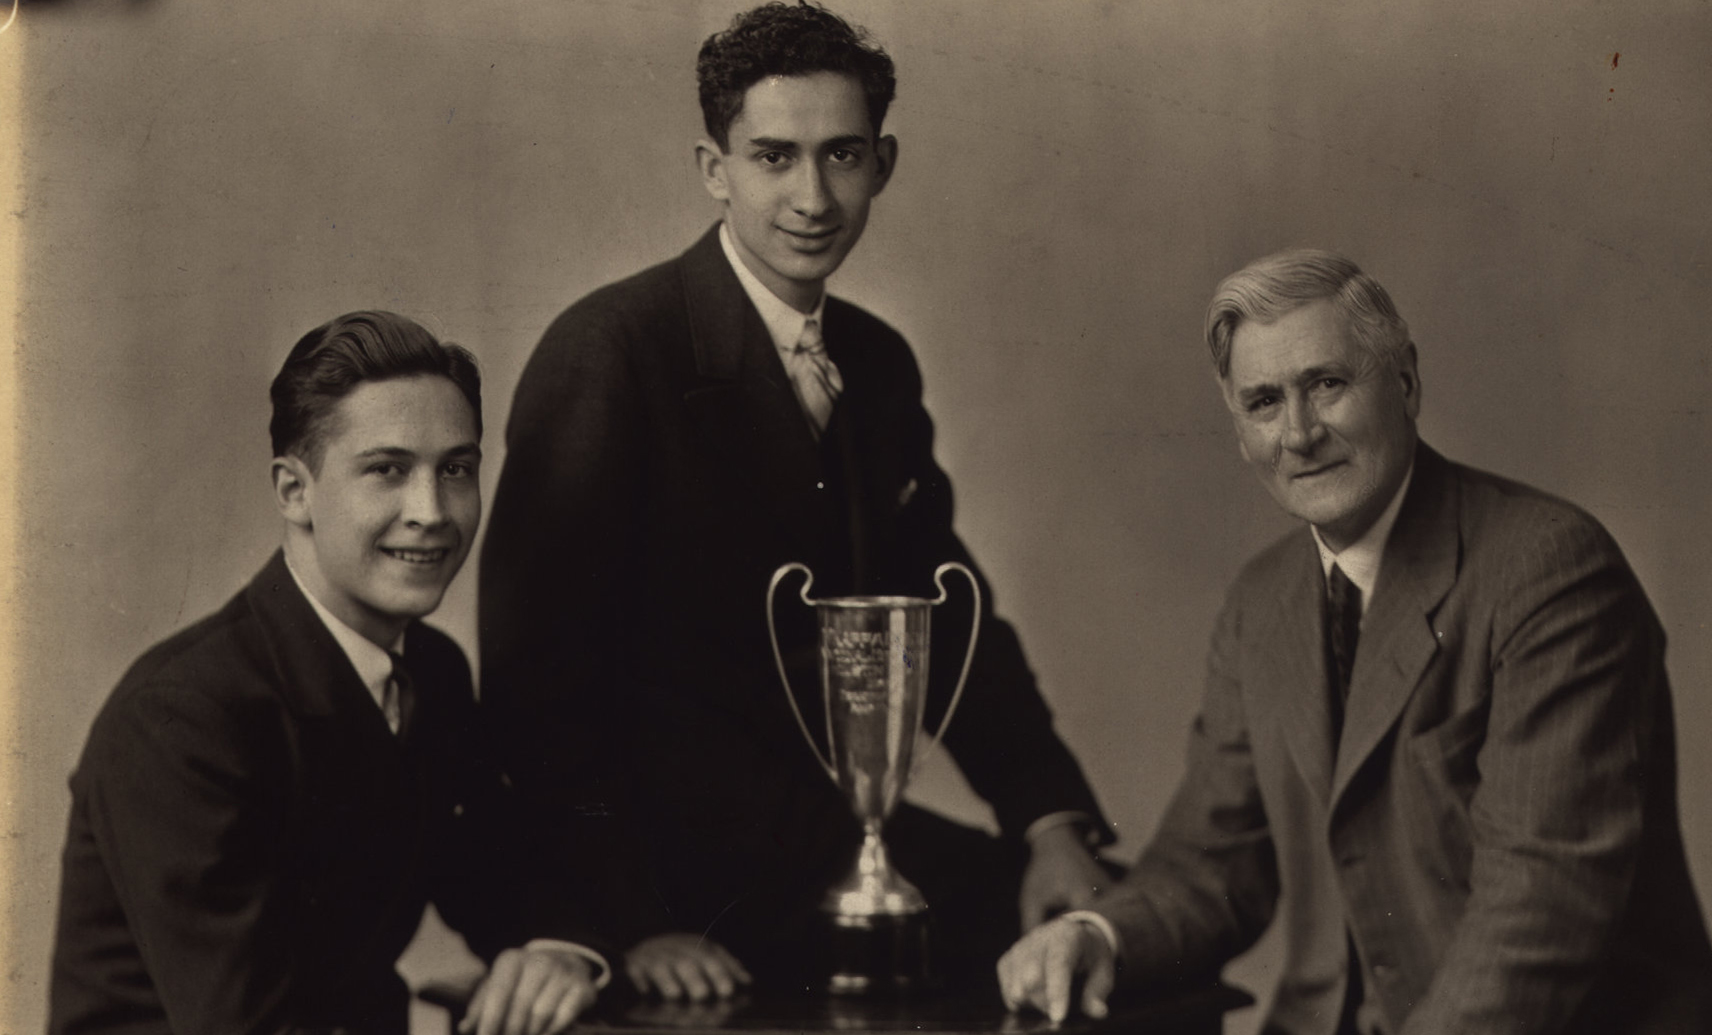 Hon. Robert Sheran (left) was the first recipient of the Distinguished Alumni award. He was on the team that won the Northwest Debate Tournament of 1936, for the College of St. Thomas.  He is shown with Abraham Kaplan and their advisor, Professor Owen McElmeel, and the winner's trophy.